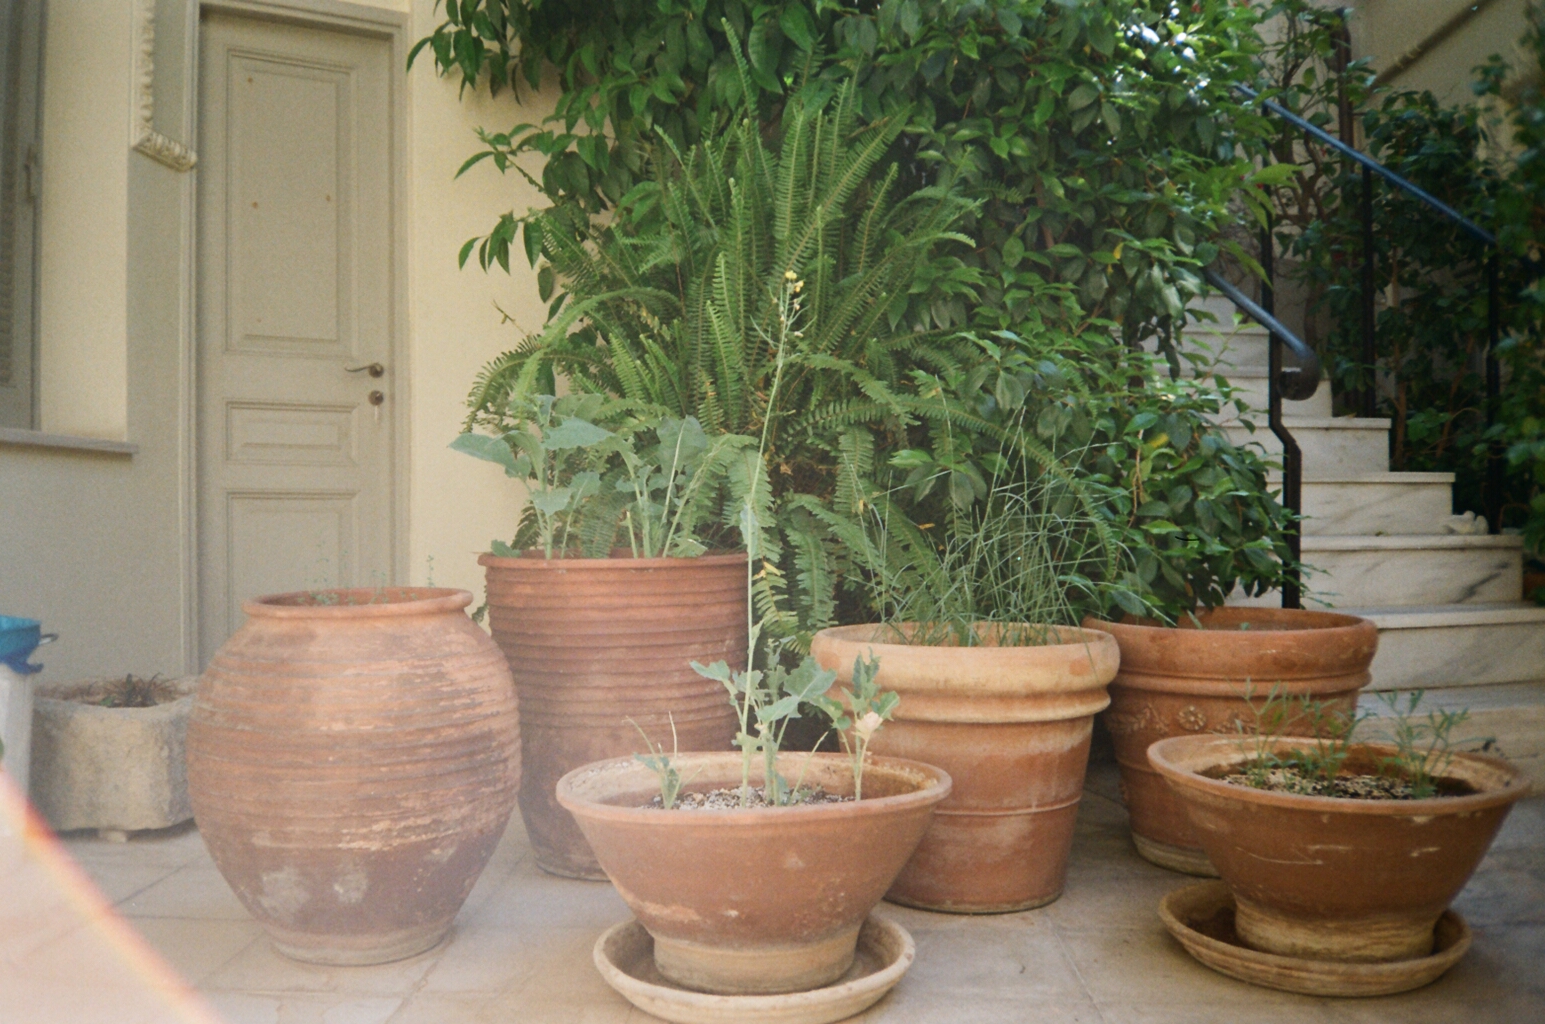 Terracotta pots holding luscious green plants sit at the bottom of a stairwell.